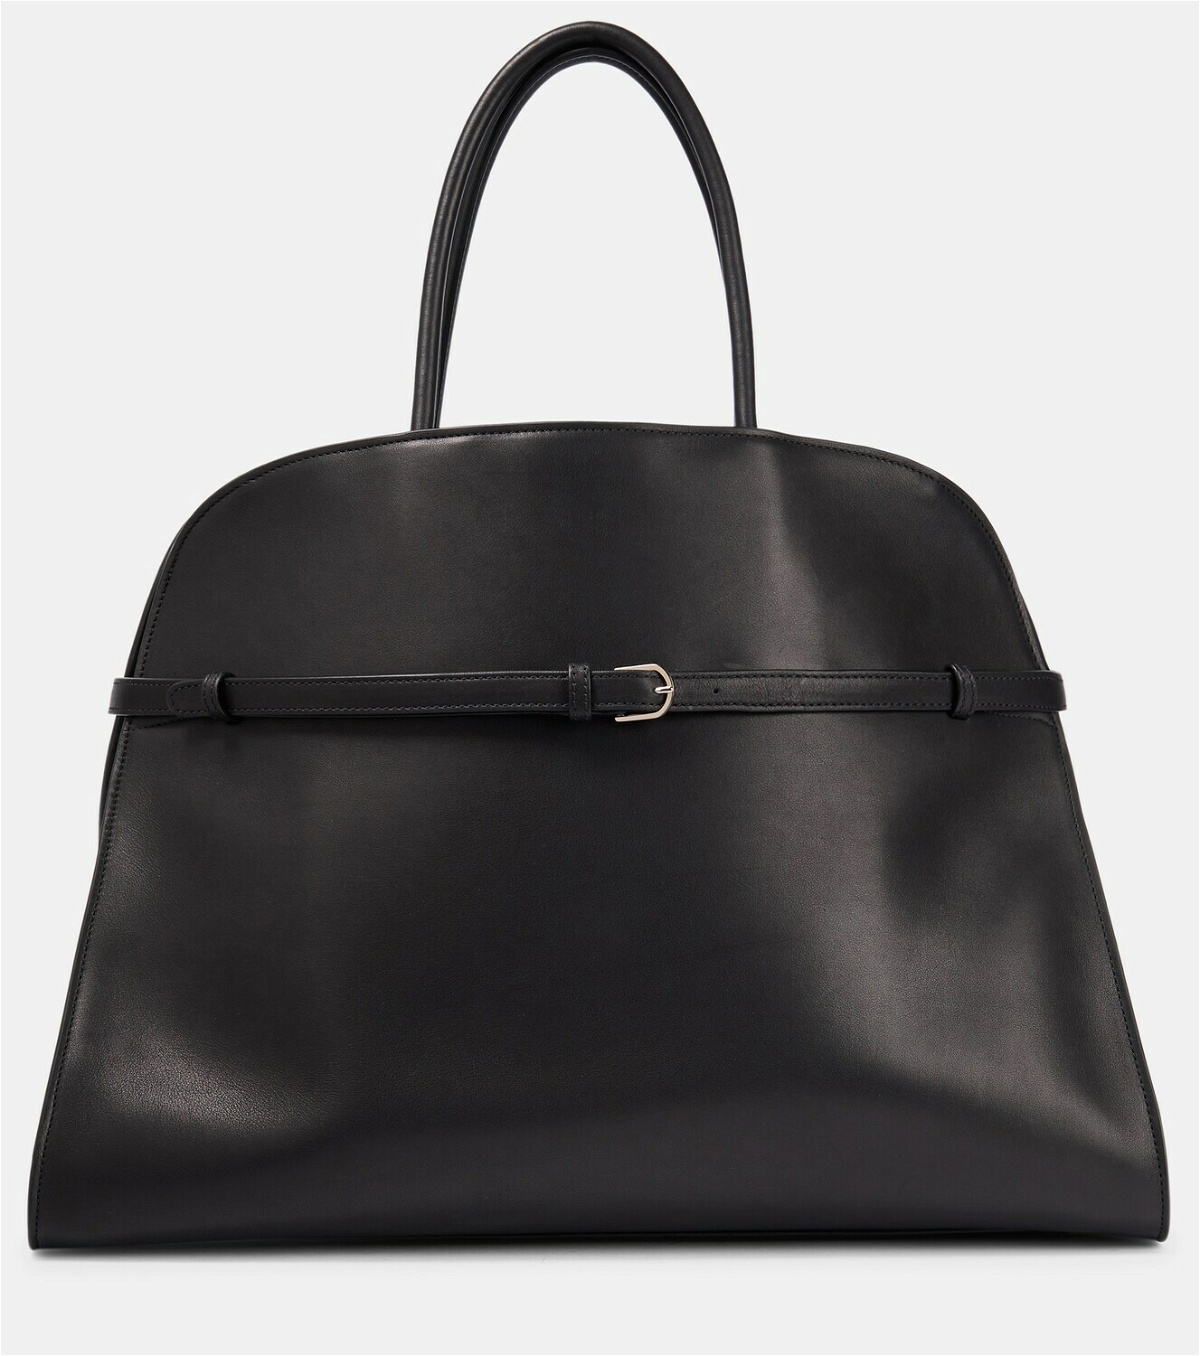 The medium N/S Park tote from @therow